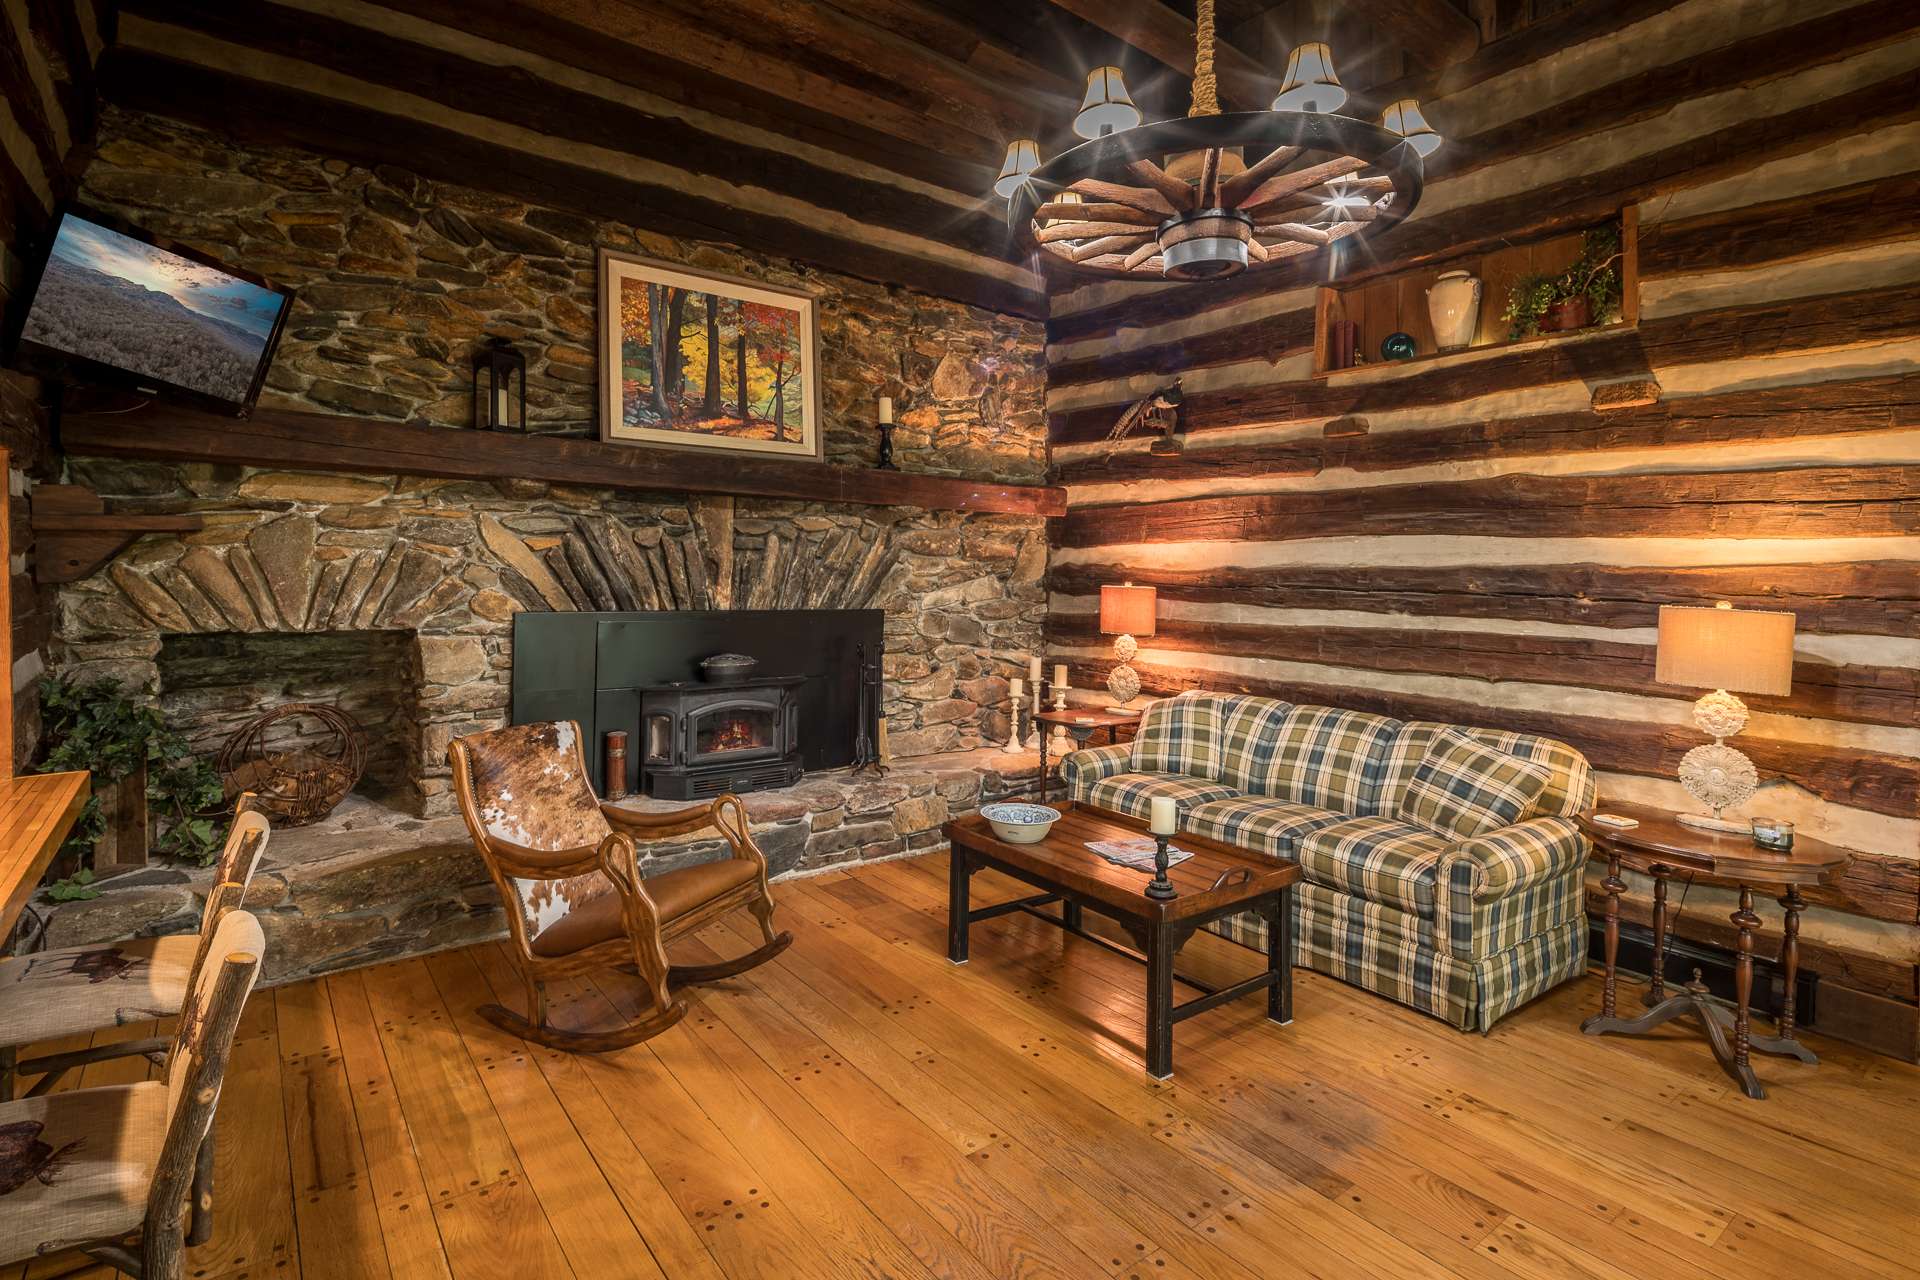 Perhaps the heart of the home is the grand fireplace made of stones from Mount Jefferson.